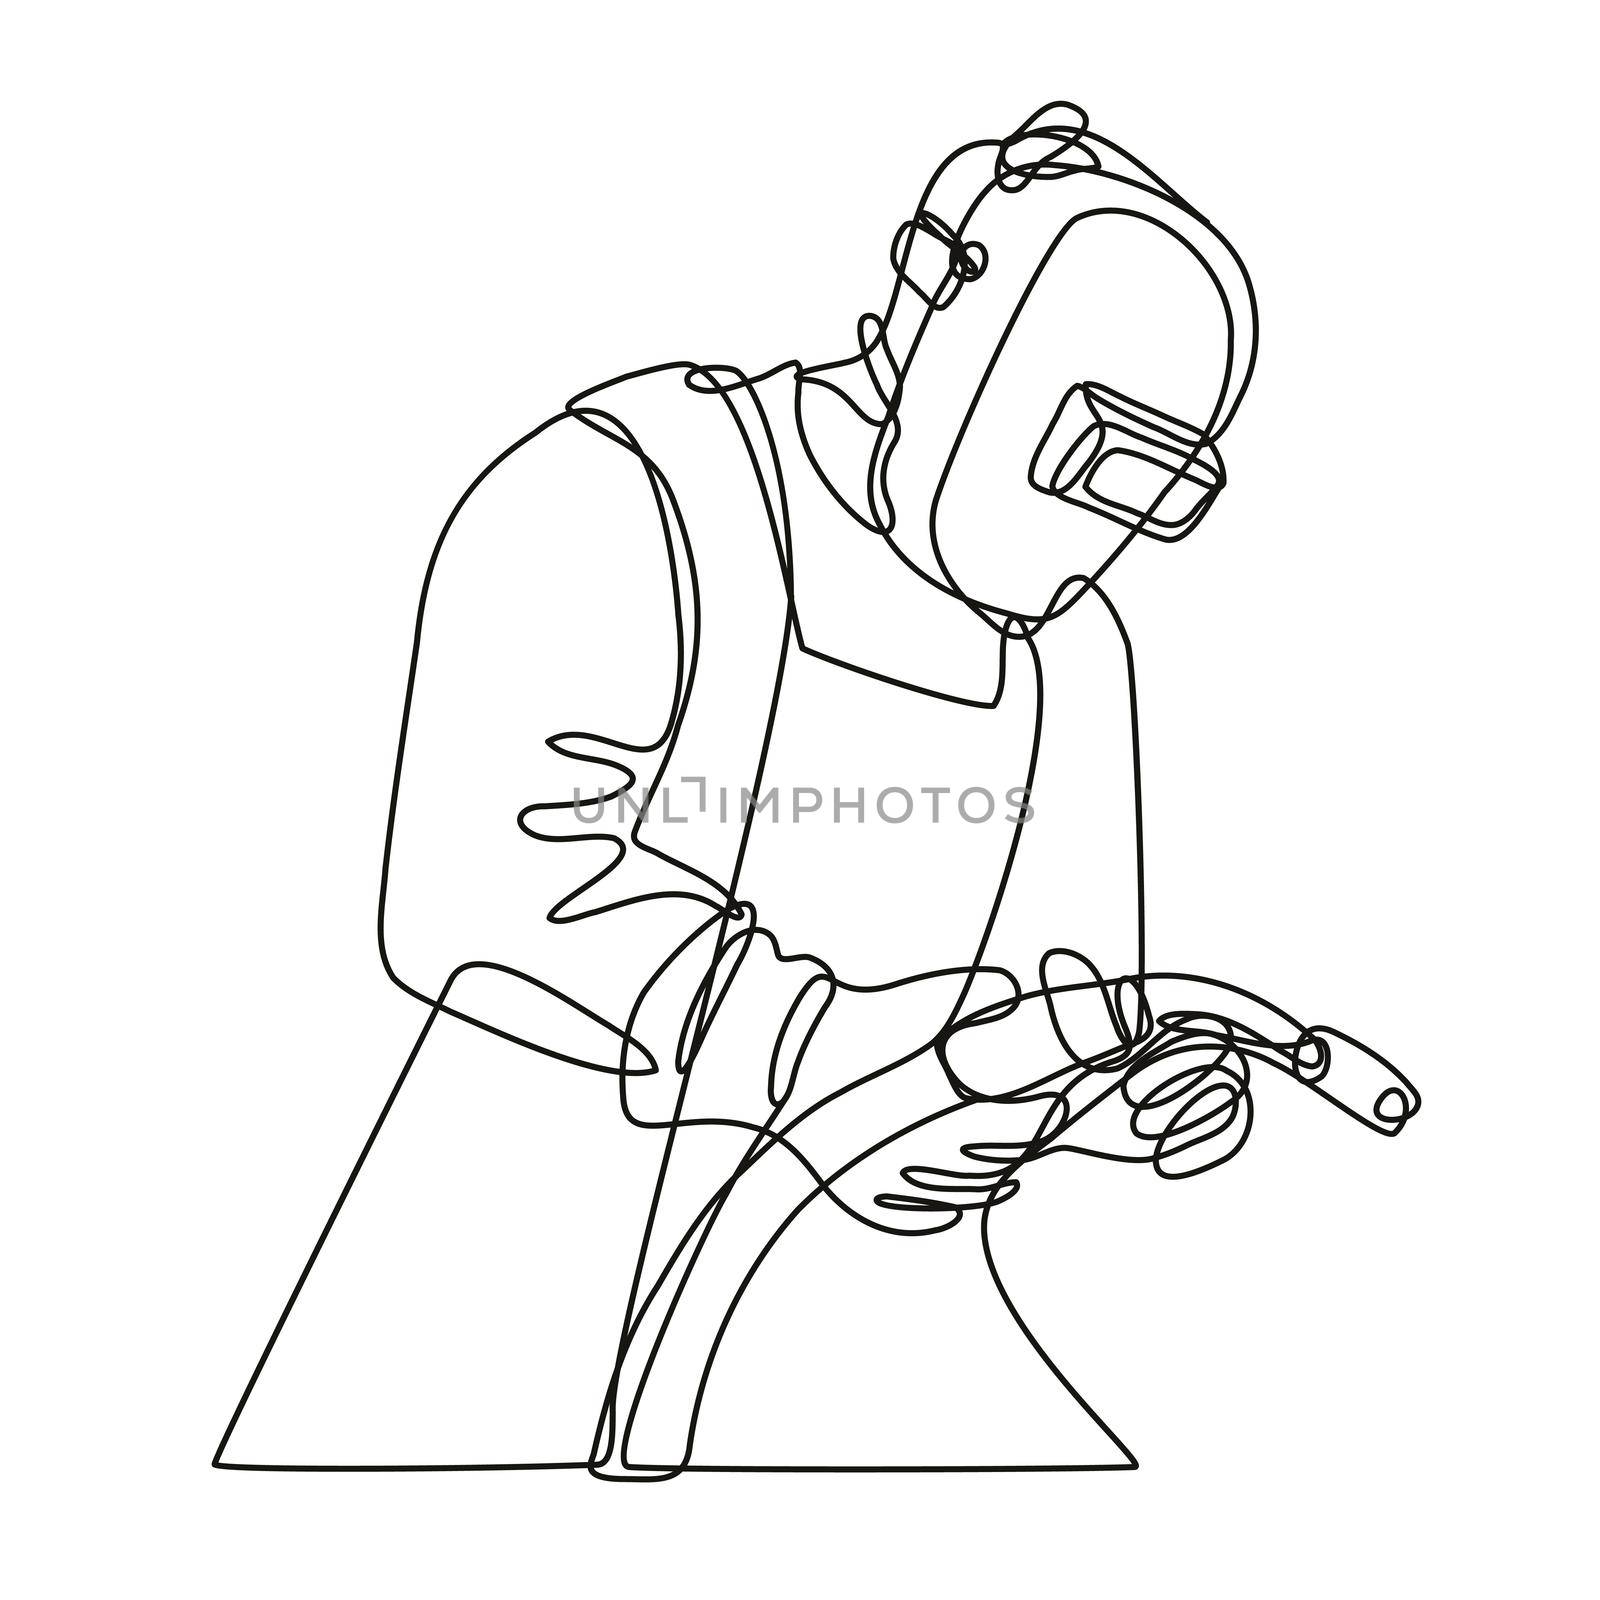 Continuous line drawing illustration of a Mig welder with visor holding welding torch done in mono line or doodle style in black and white on isolated background. 